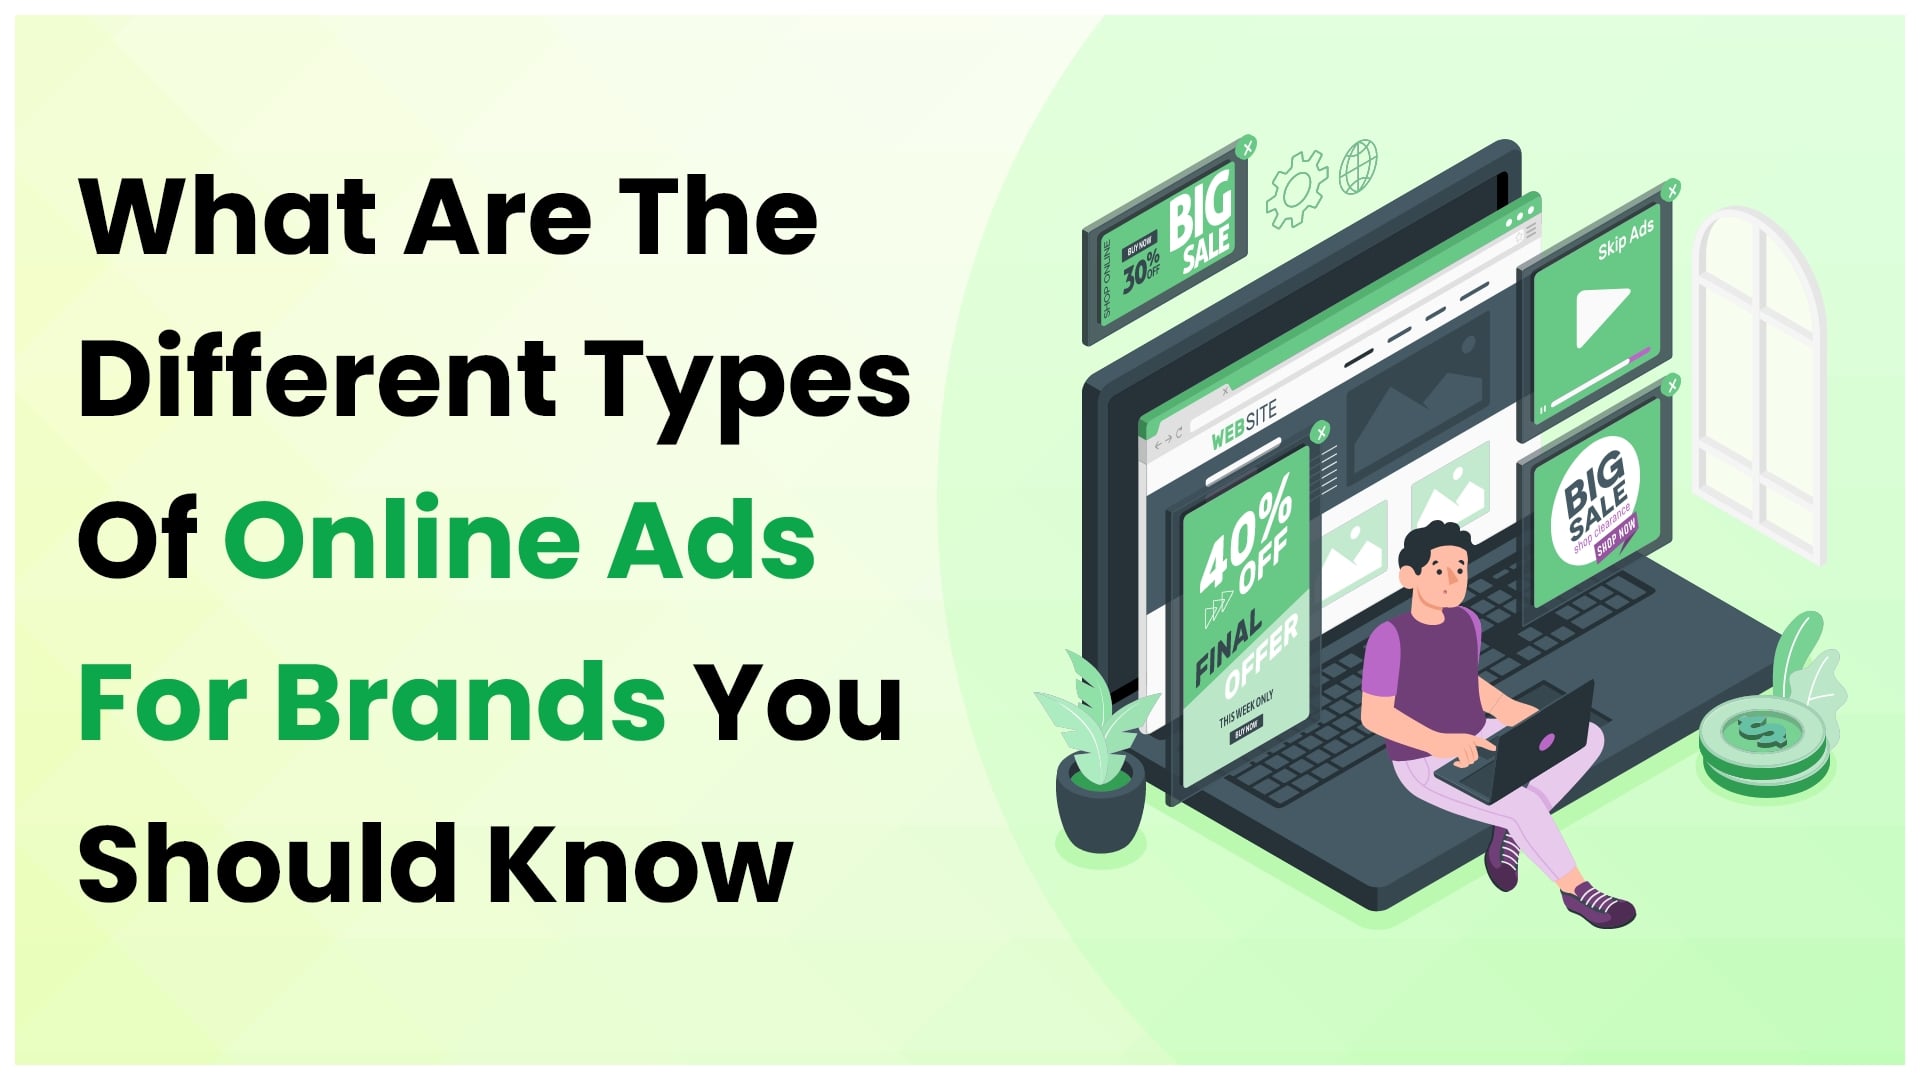 What Are The Different Types Of Online Ads For Brands You Should Know